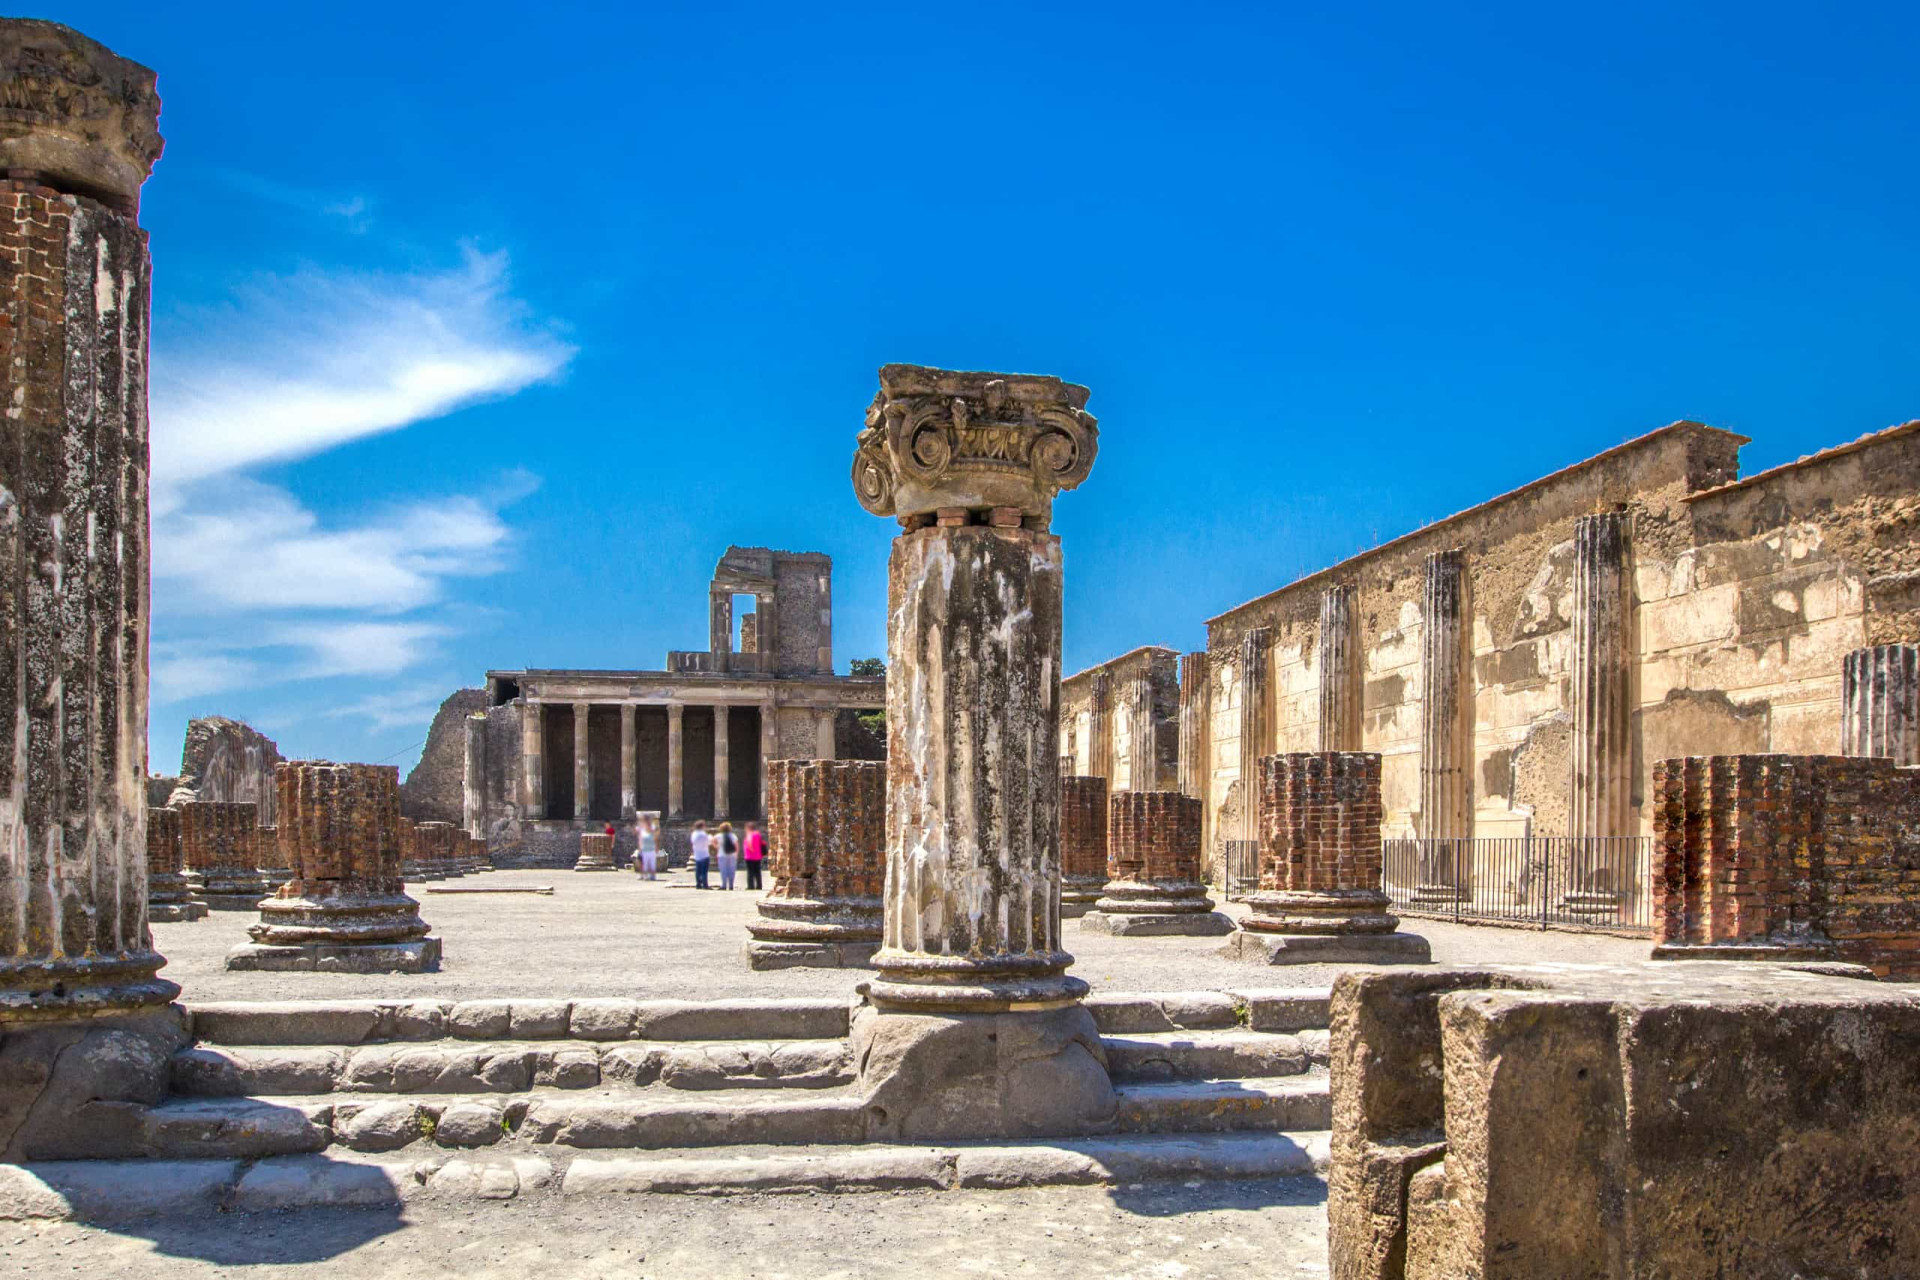 Traversing through Pompeii's streets is a great way to absorb the feel of the ancient city. Via della Abbondanza was a main street that contained shops and restaurants.<p><a href="https://www.msn.com/en-us/community/channel/vid-7xx8mnucu55yw63we9va2gwr7uihbxwc68fxqp25x6tg4ftibpra?cvid=94631541bc0f4f89bfd59158d696ad7e">Follow us and access great exclusive content every day</a></p>